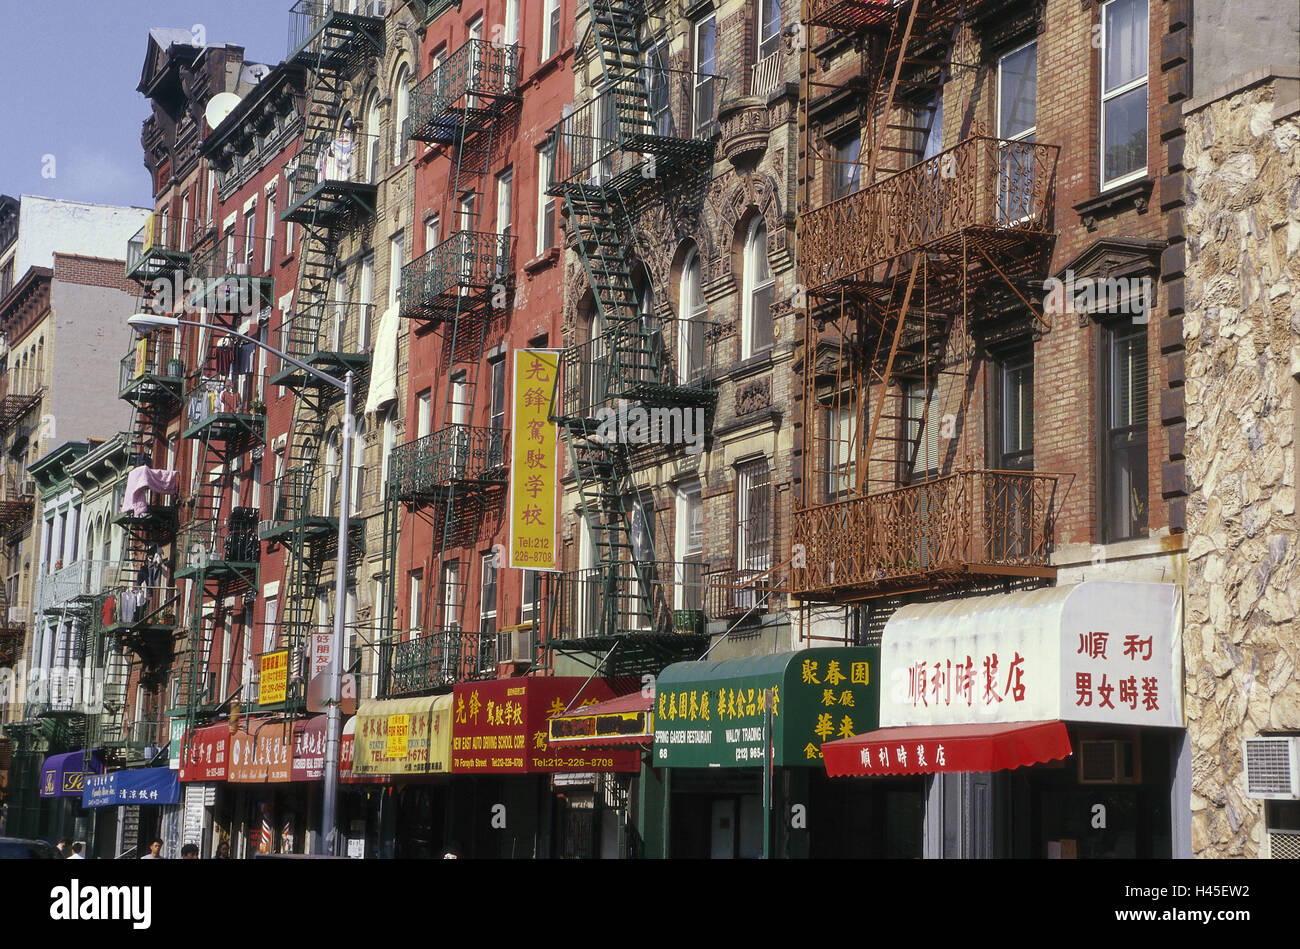 The USA, New York city, Chinatown, house line, Manhattan, residential district, fire escapes, fire escapes, facades, house facades, shops, shops, windows, residential houses, dwelling houses, flatlets, Stock Photo